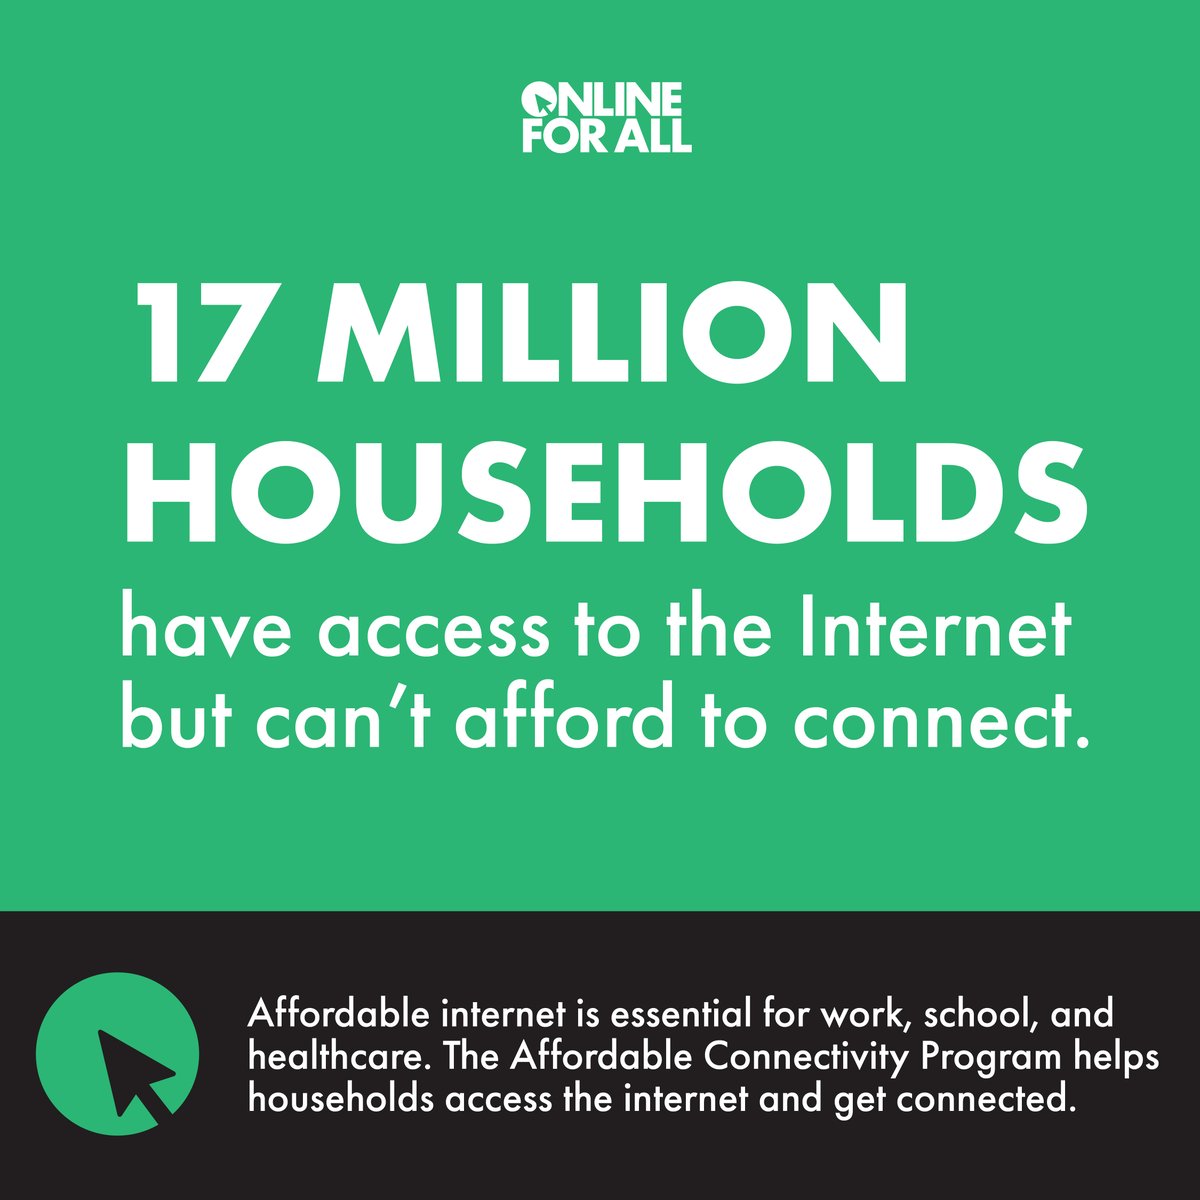 Through the #OnlineForAll campaign, ED & @CivicNation work to provide free Internet access, closing the digital divide for millions of students & their families. 

Sign up at onlineforall.org.

#InternationalInternetDay